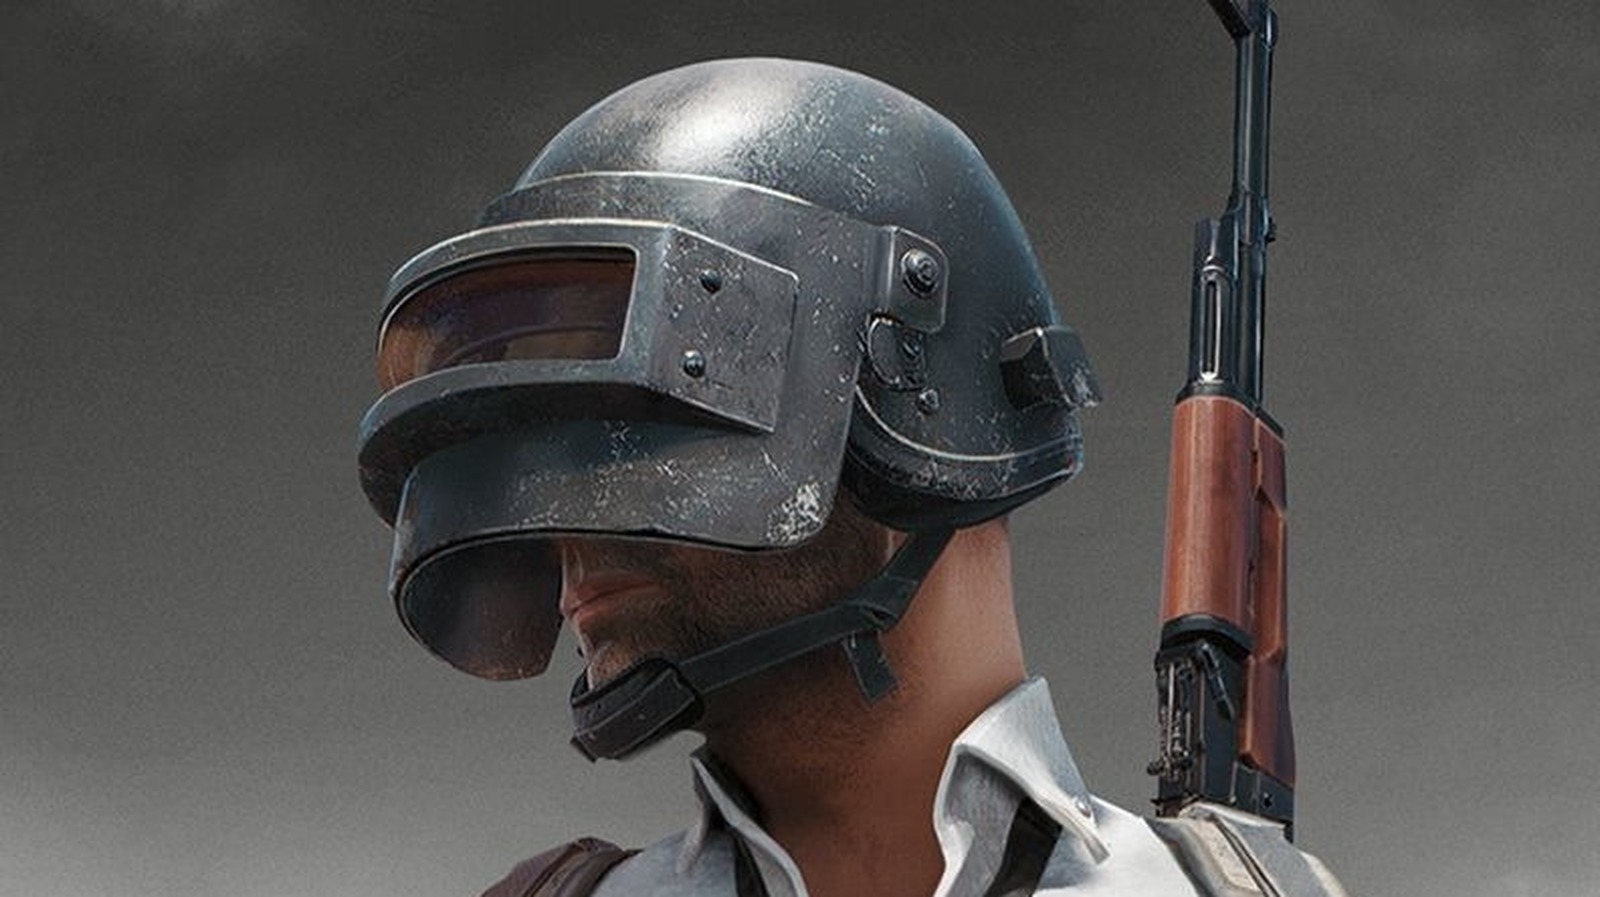 Dinkarville Suposición Trivial The Most Expensive Skins In PlayerUnknown's Battlegrounds